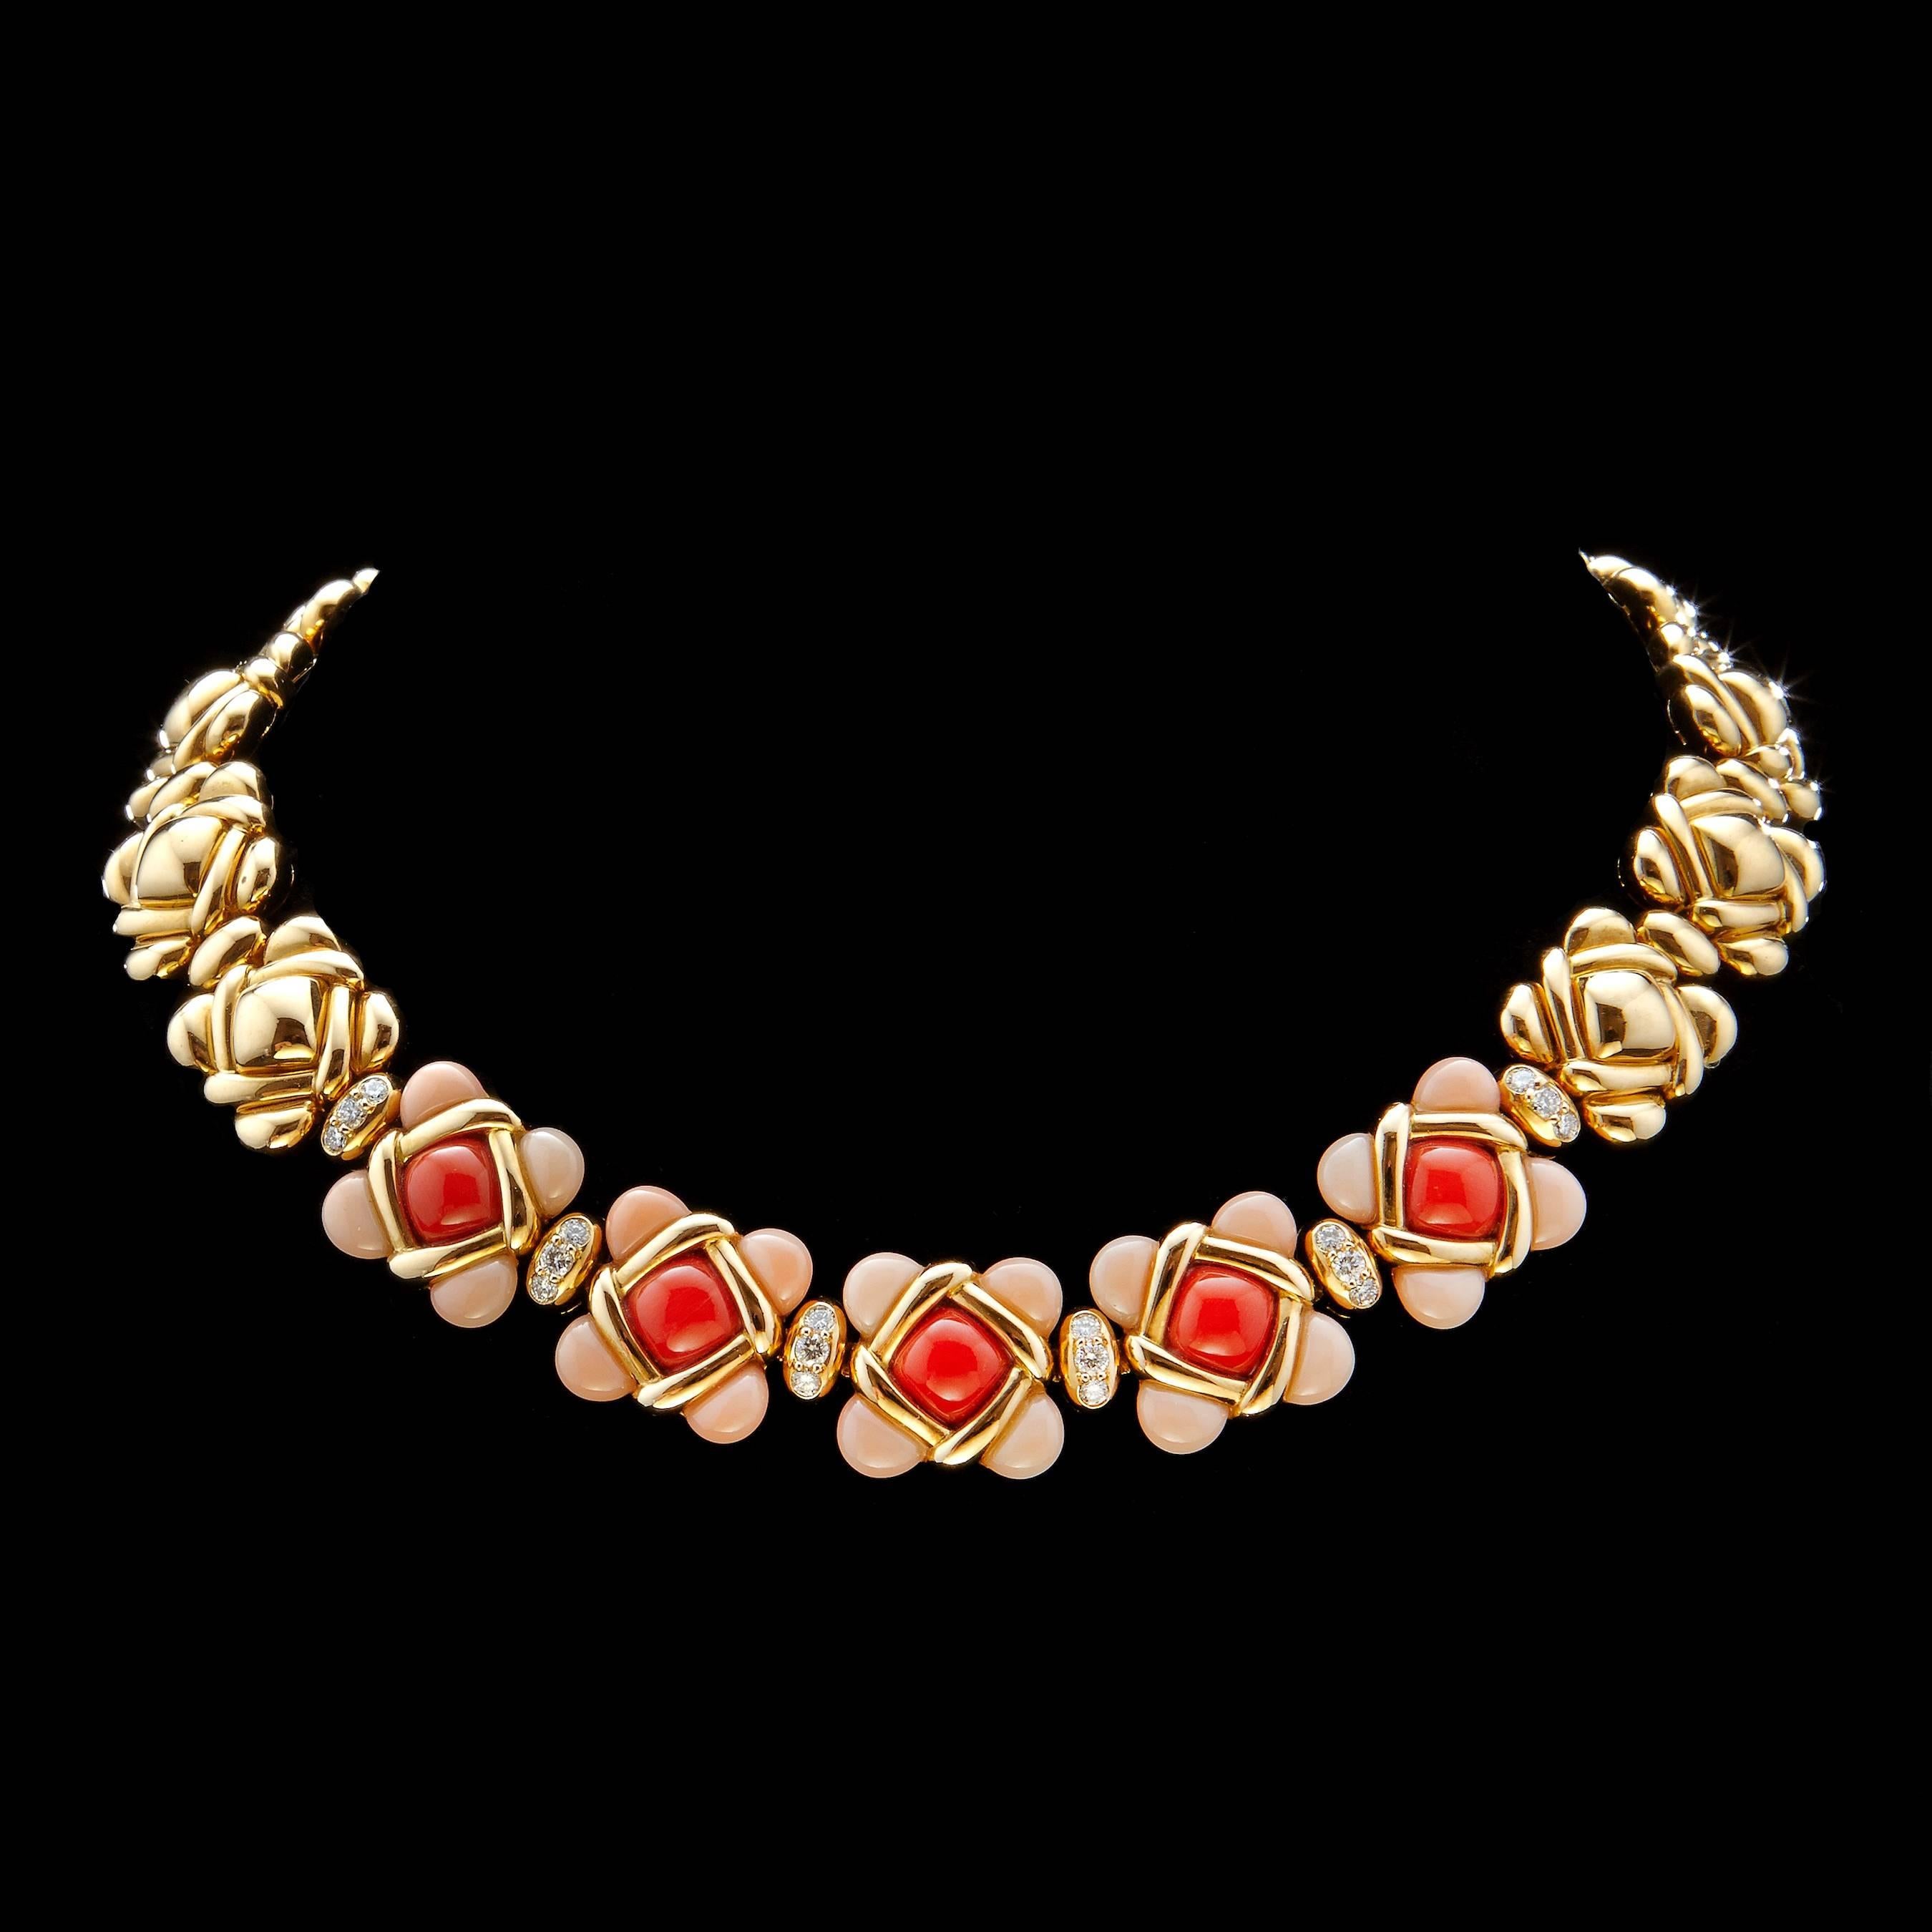 Articulated 18 Karats yellow gold necklace showing geometrical patterns with cabochons.Five of them have central coral cabochons in between diamond links.
Diamond: 1.04 Carat
Signed Van cleef & Arpels 
And Numbered
